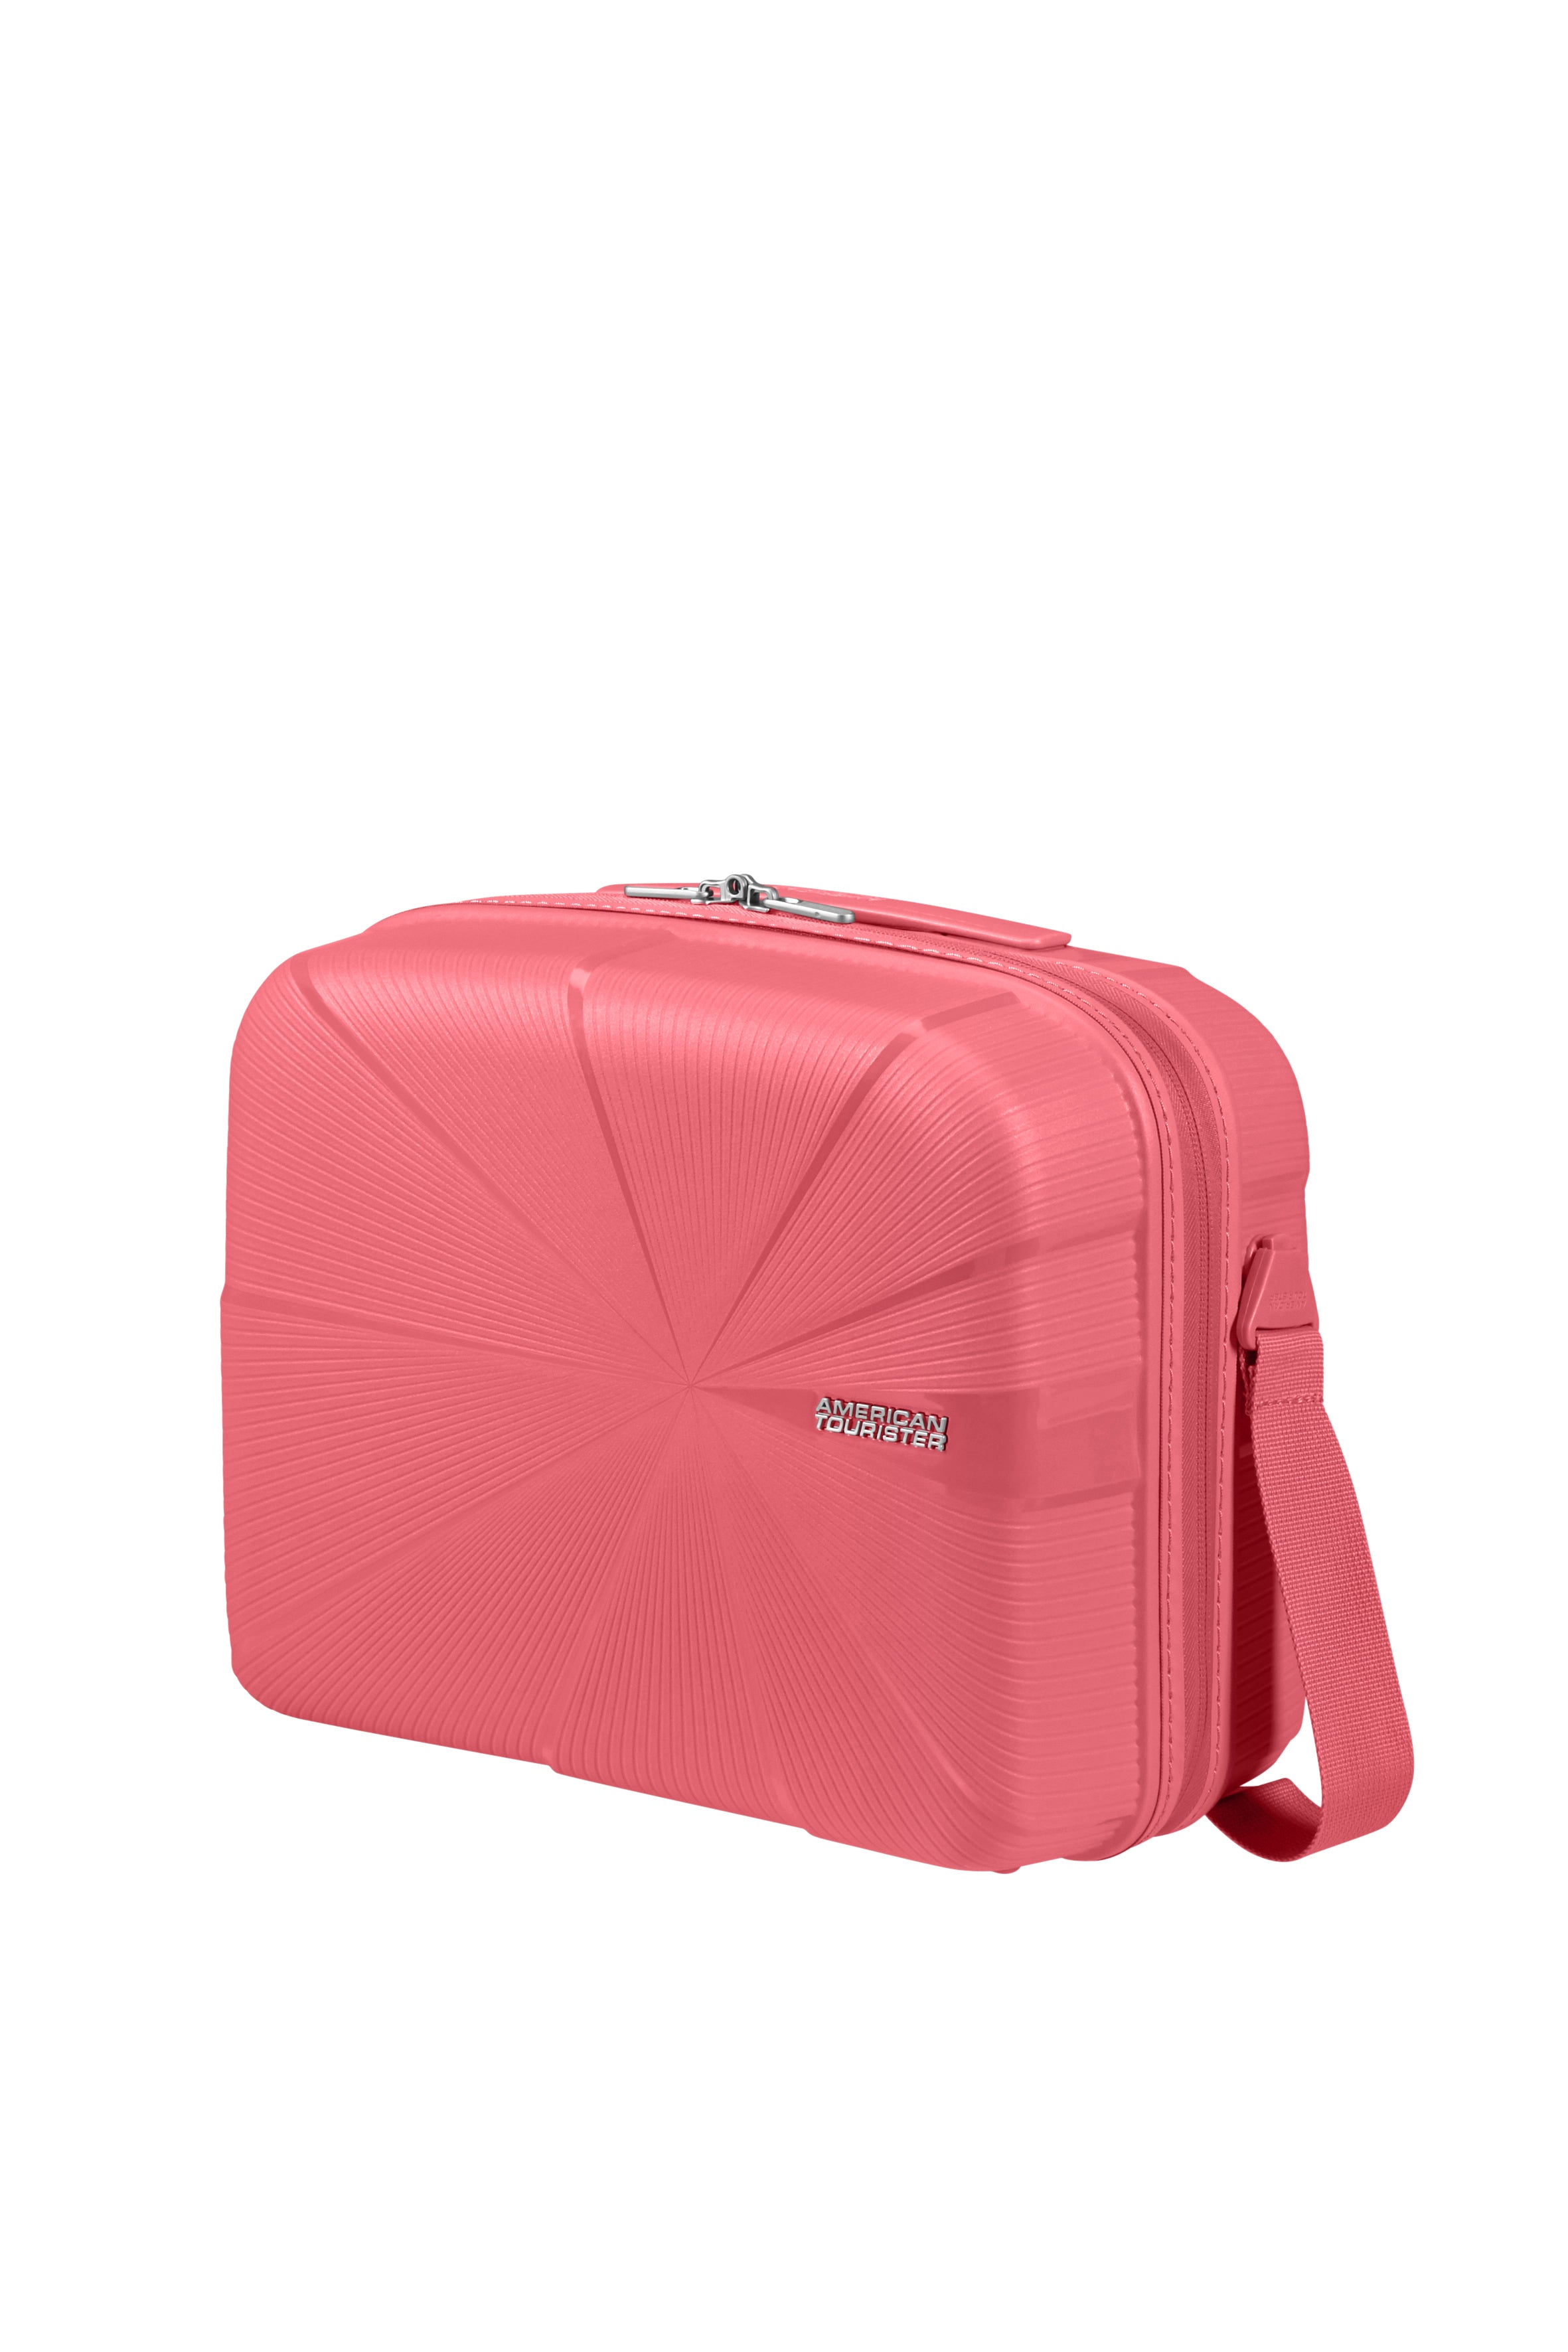 American Tourister - Star Vibe Beauty Case - Sun kissed Coral-2